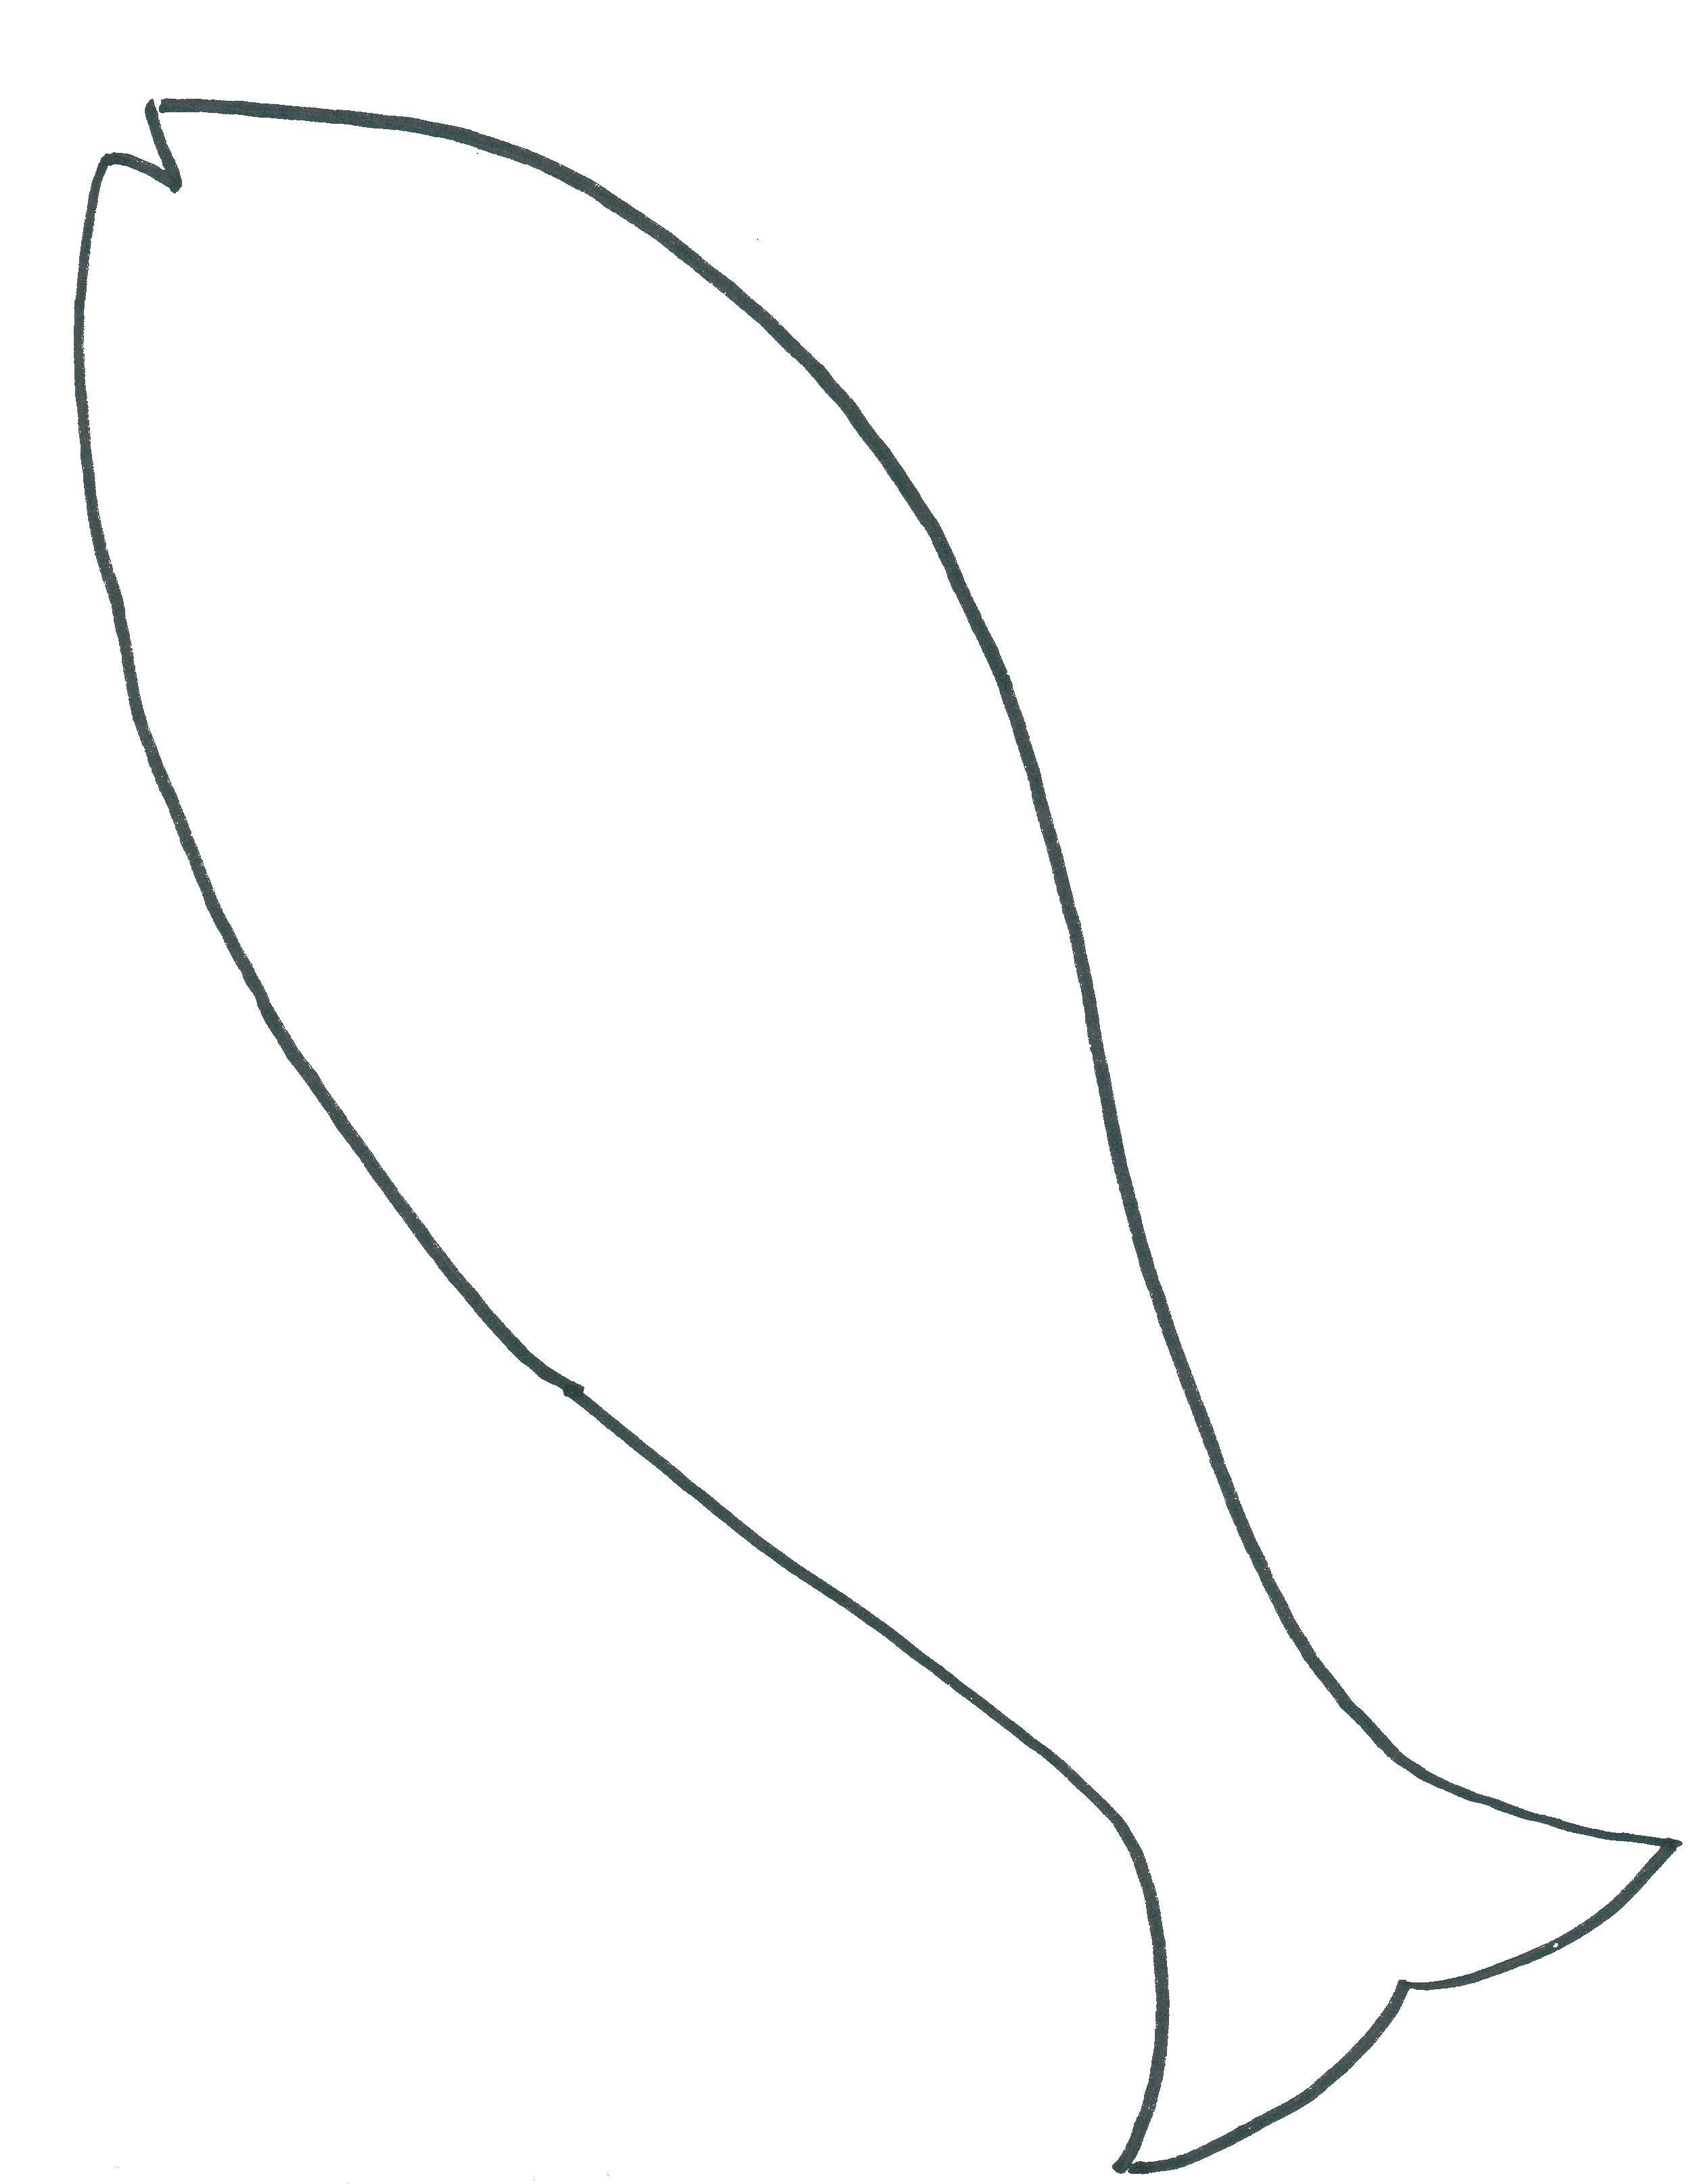 Coloring The contour of the fish. Category The contours of the fish to cut. Tags:  contours, fish.